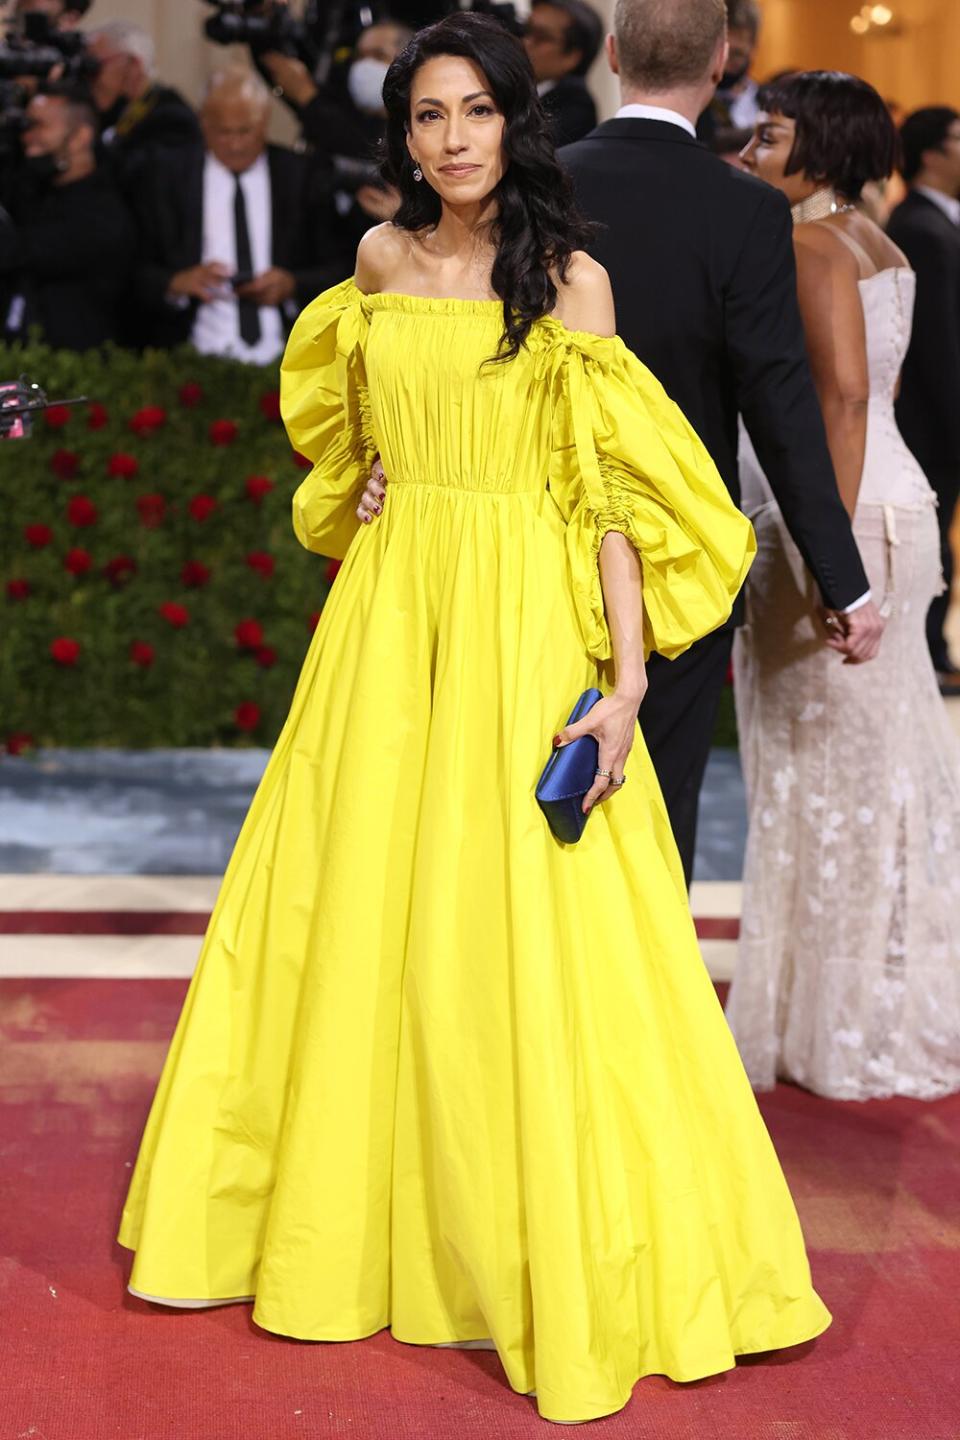 Huma Abedin attends The 2022 Met Gala Celebrating "In America: An Anthology of Fashion" at The Metropolitan Museum of Art on May 02, 2022 in New York City.